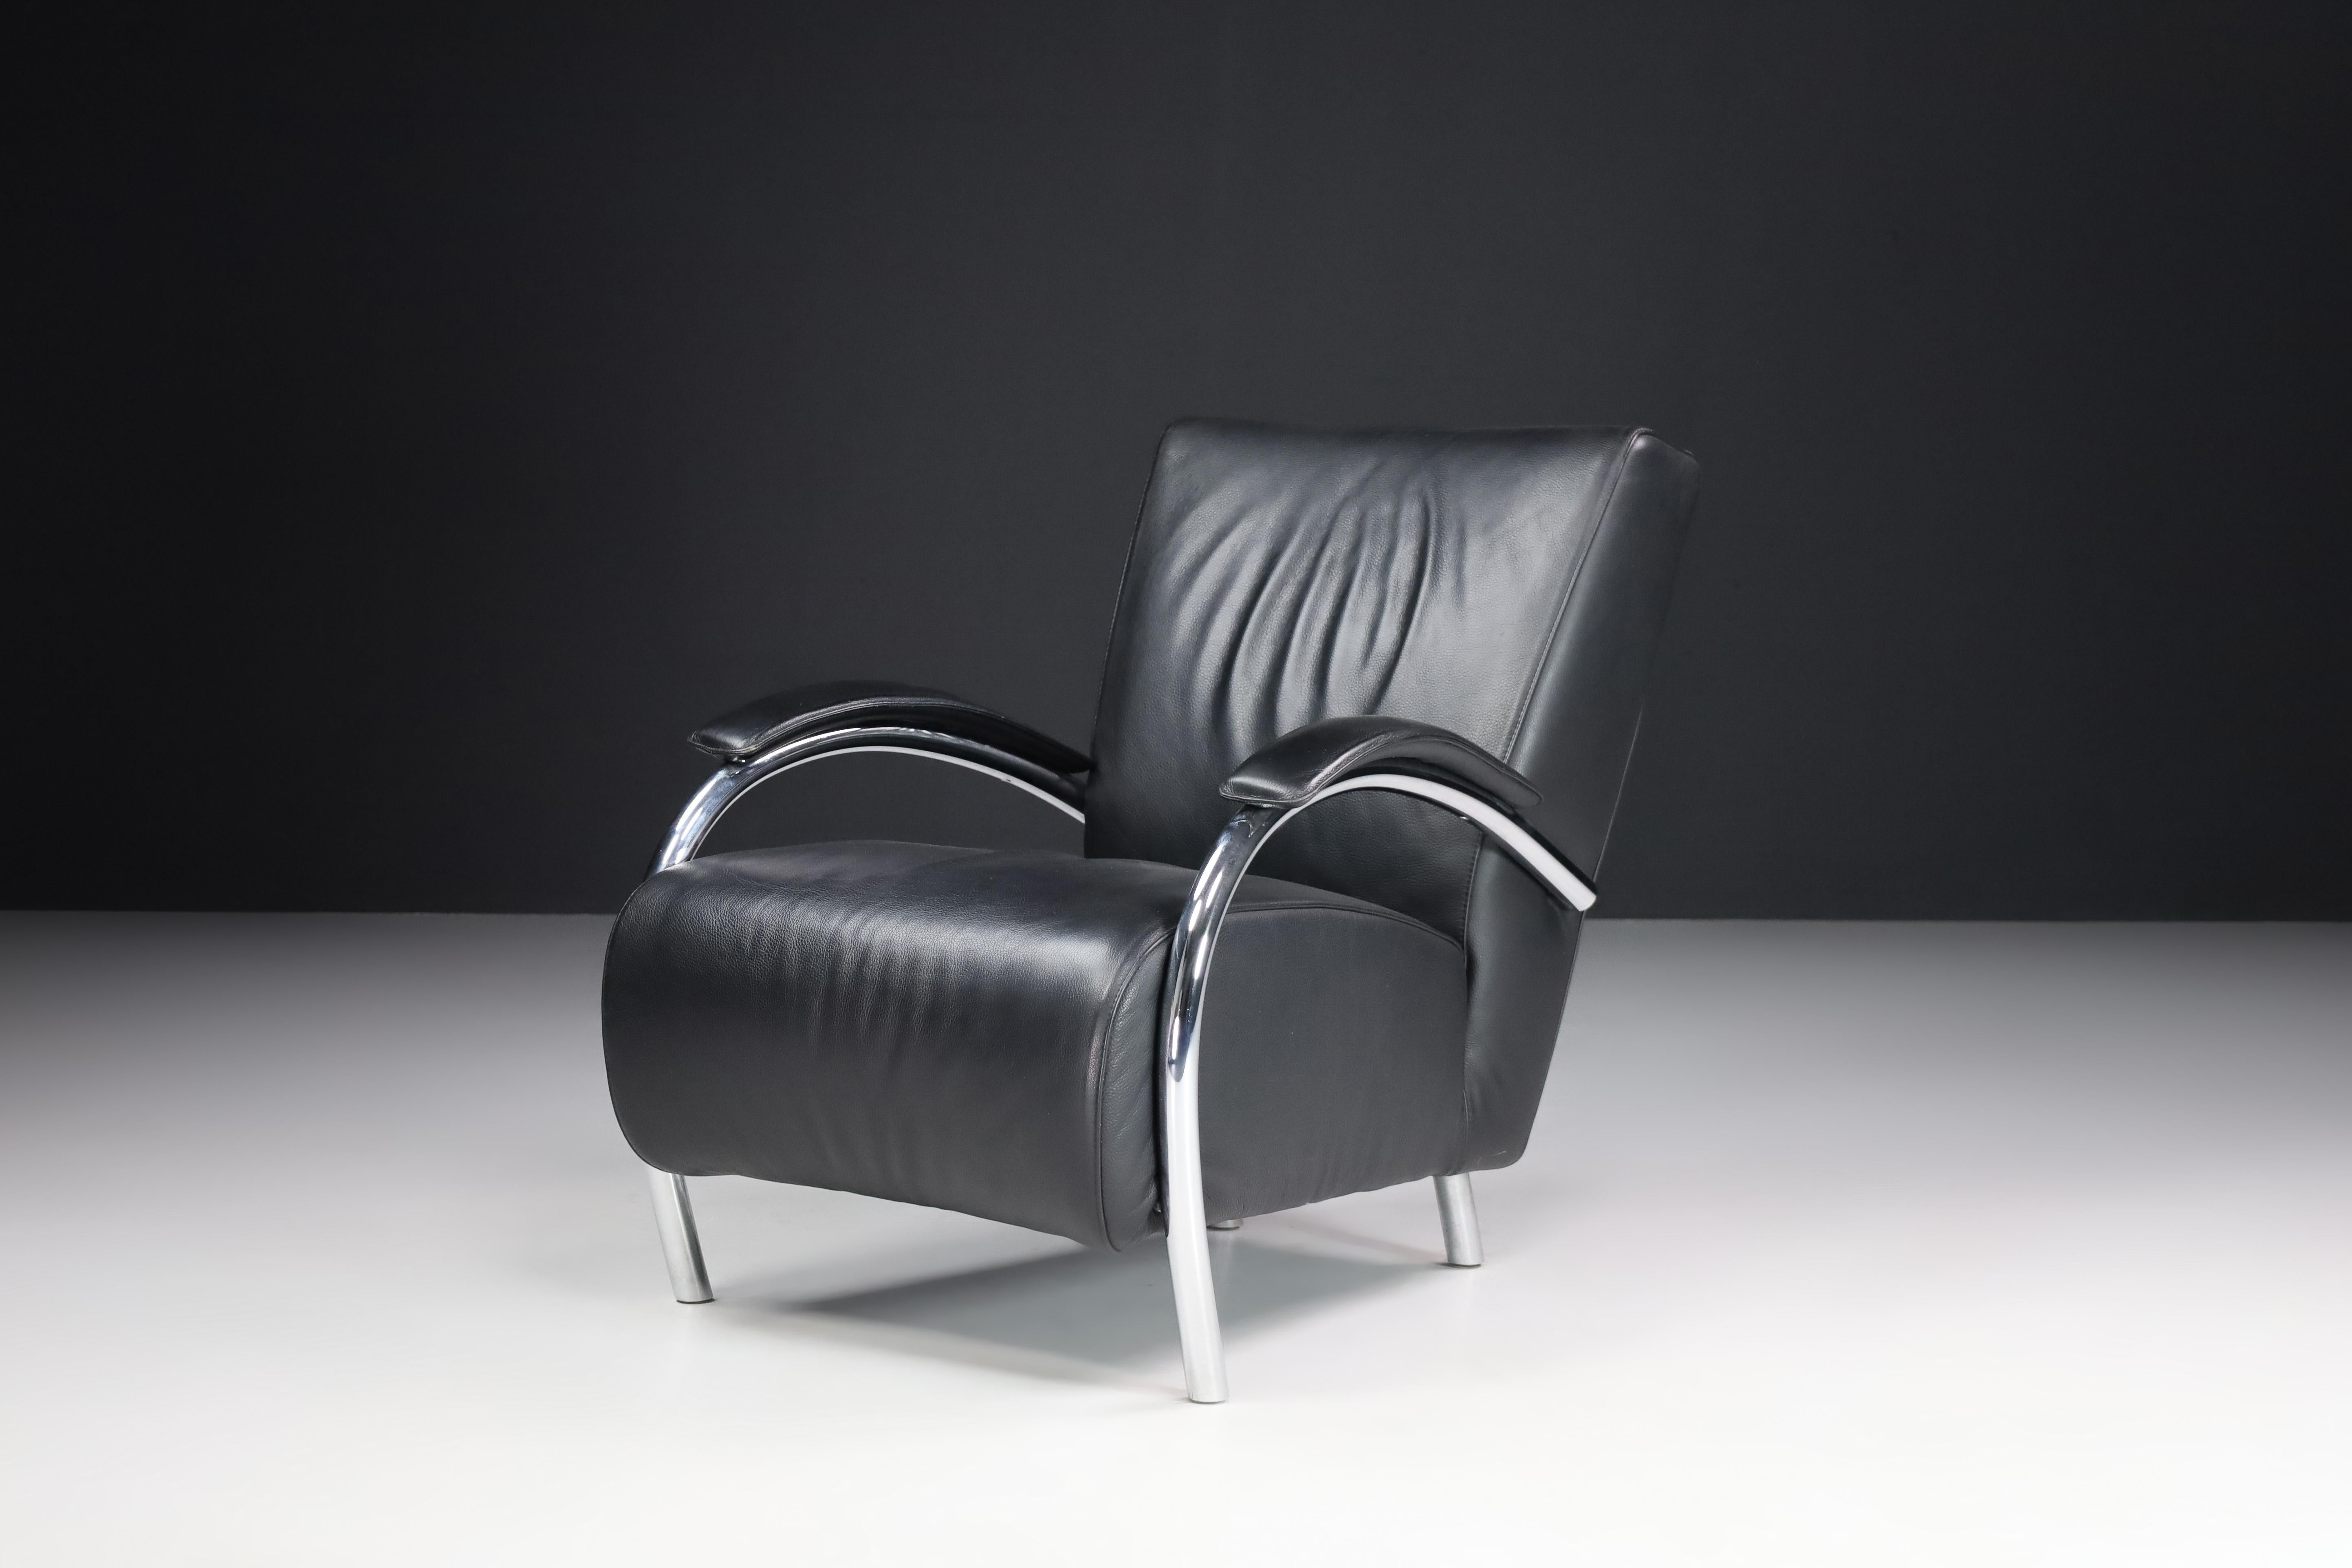 Leather and Chrome Lounge Chairs For Molinari, Italy 1980s For Sale 4